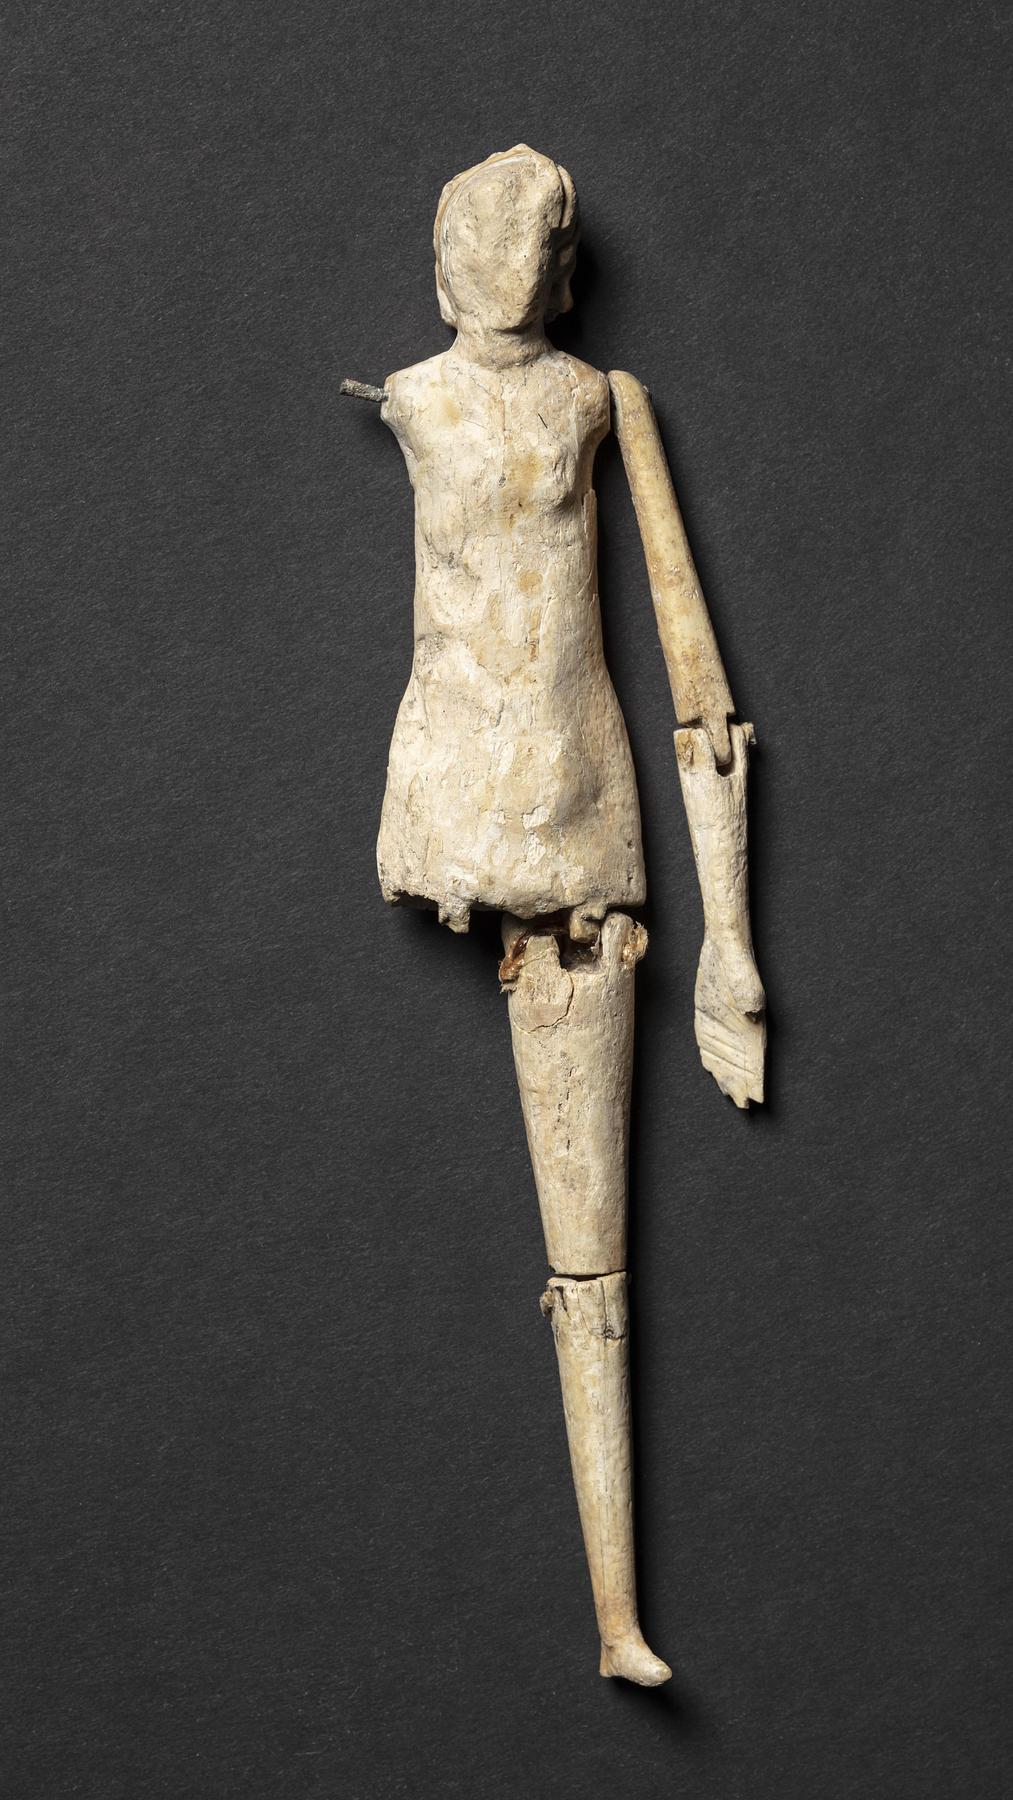 Doll with articulated limbs, H3225